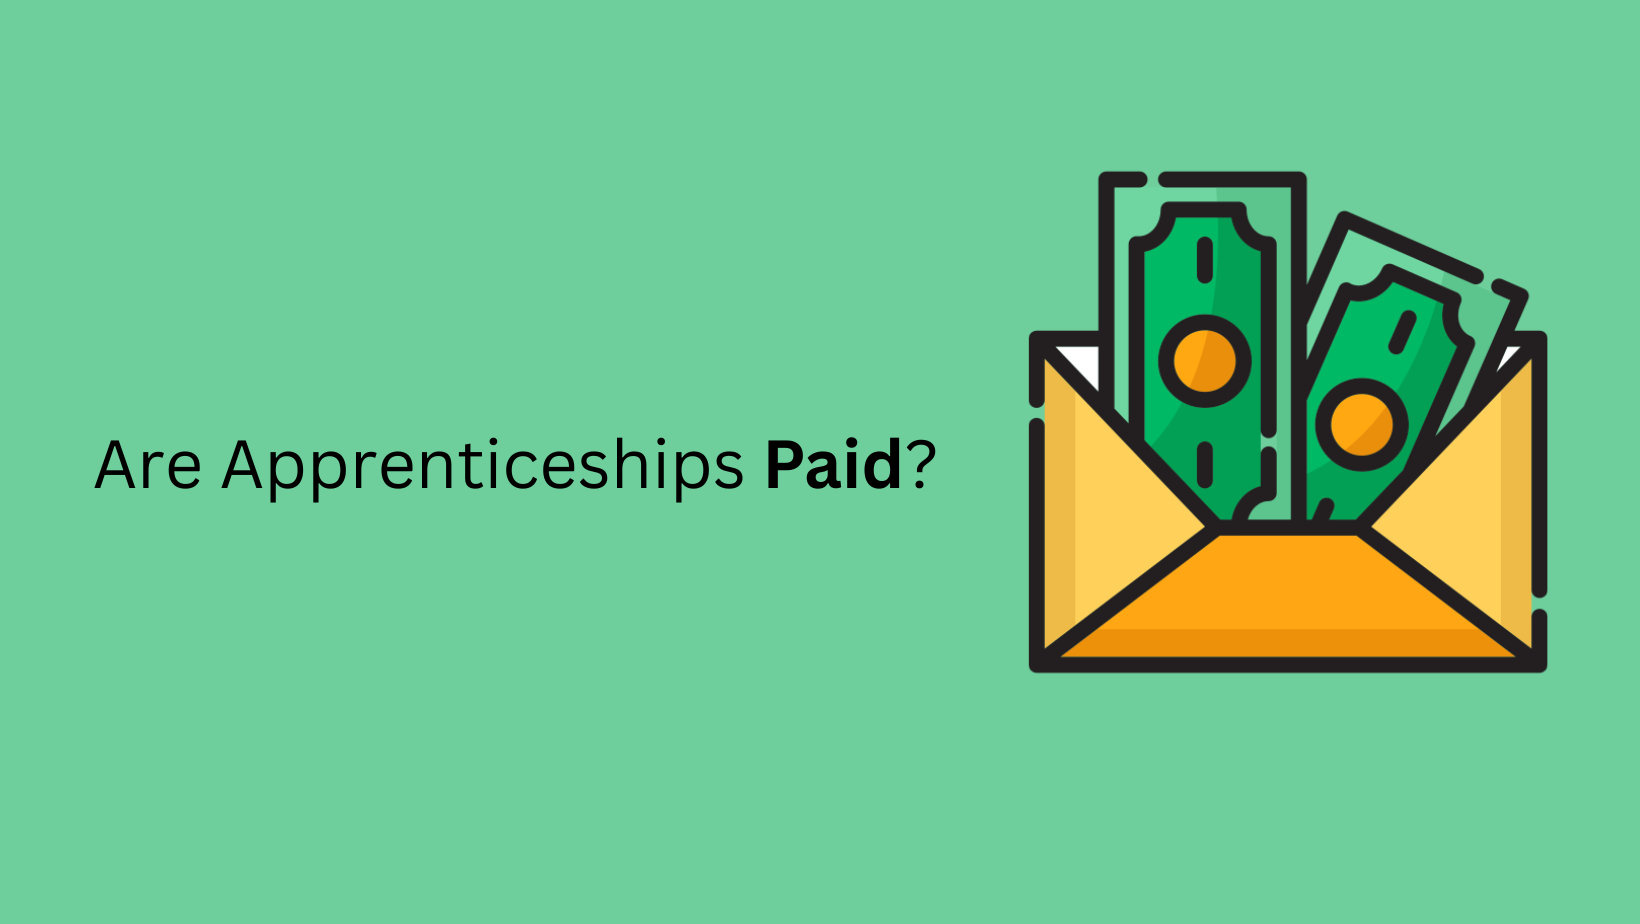 Are Apprenticeships Paid